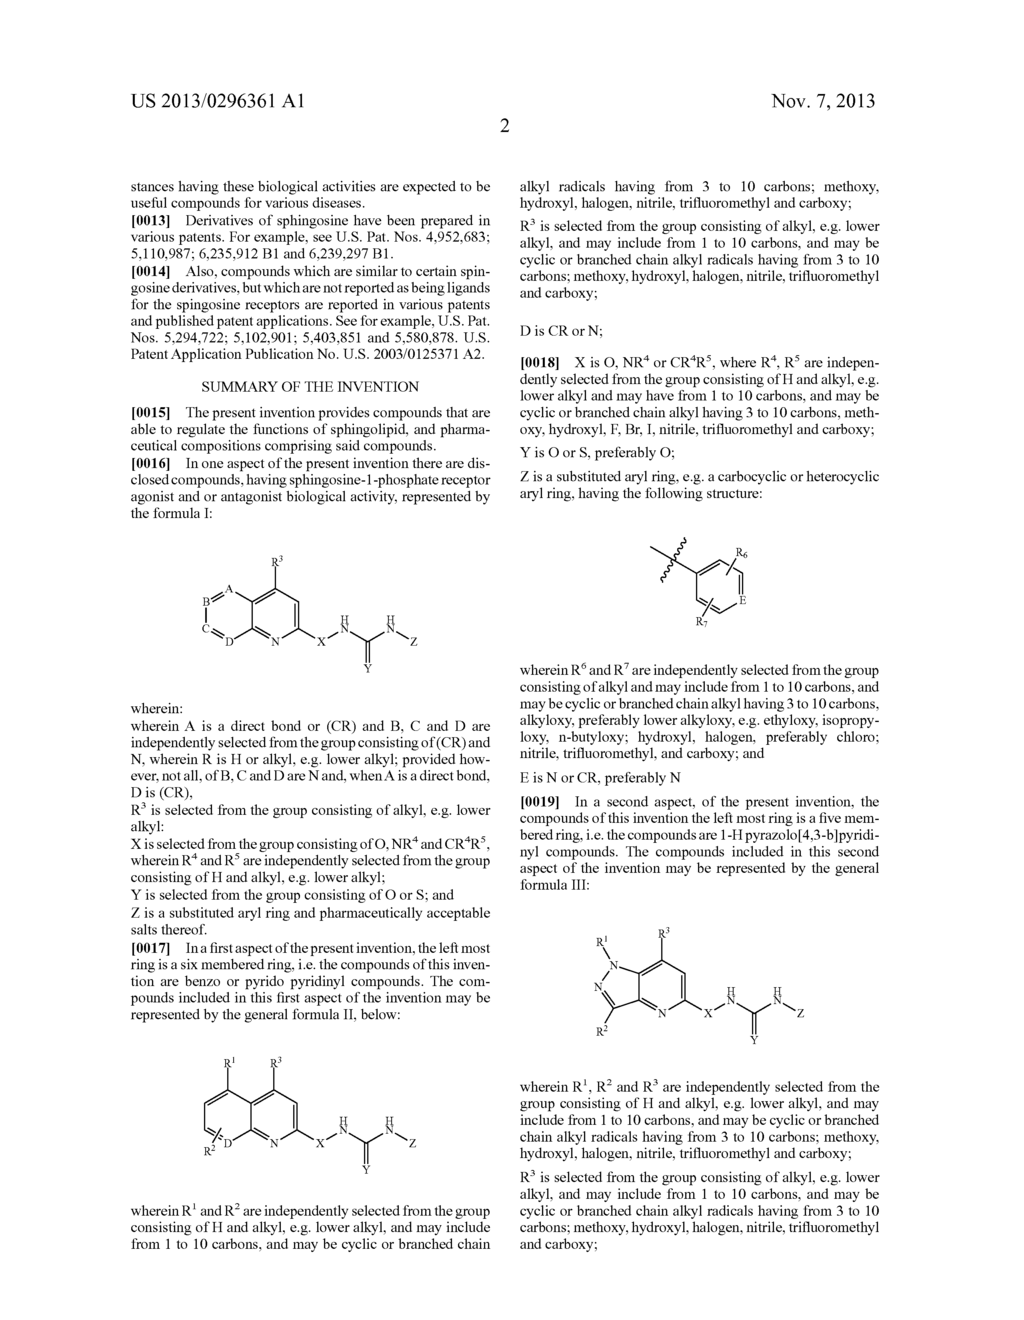 Condensed Ring Pyridine Compounds As Subtype-Selective Modulators Of     Sphingosine-1-Phosphate-2 (S1P2) Receptors - diagram, schematic, and image 03